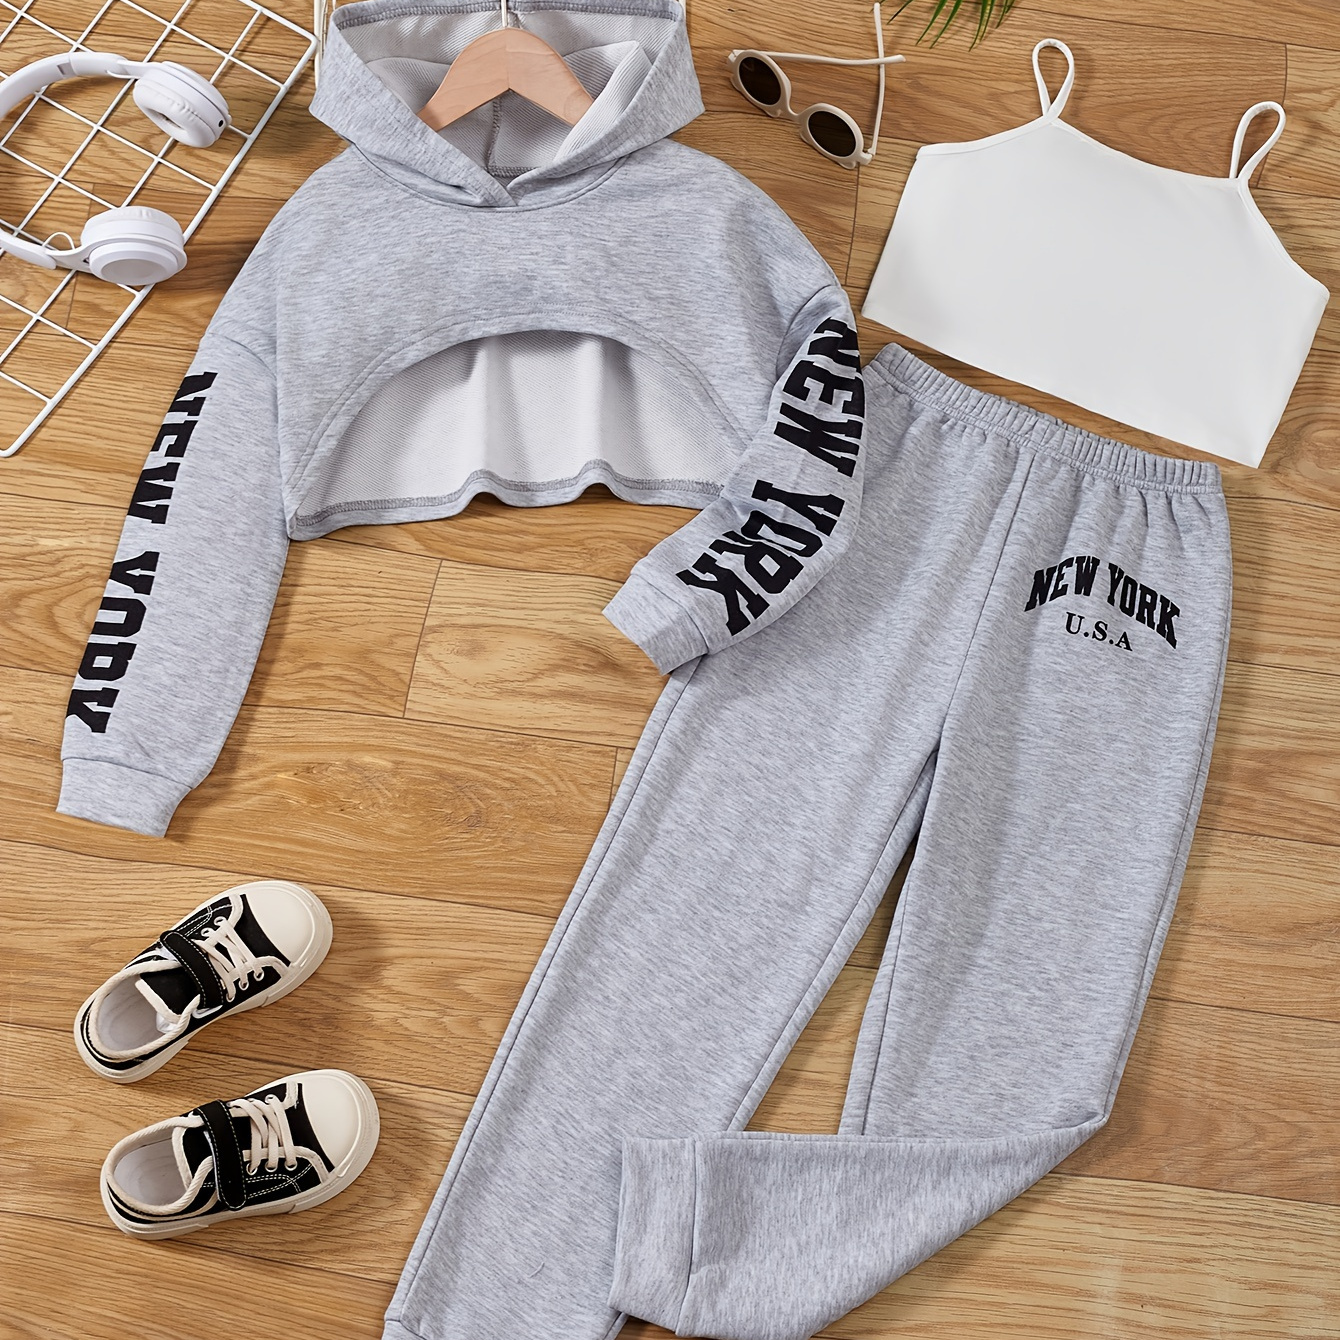 

3pcs Girl's Trendy Outfit, Crop Hoodie & Cami Top & Sweatpants Set, New York Print Casual Long Sleeve Top, Kid's Clothes For Spring Fall Winter